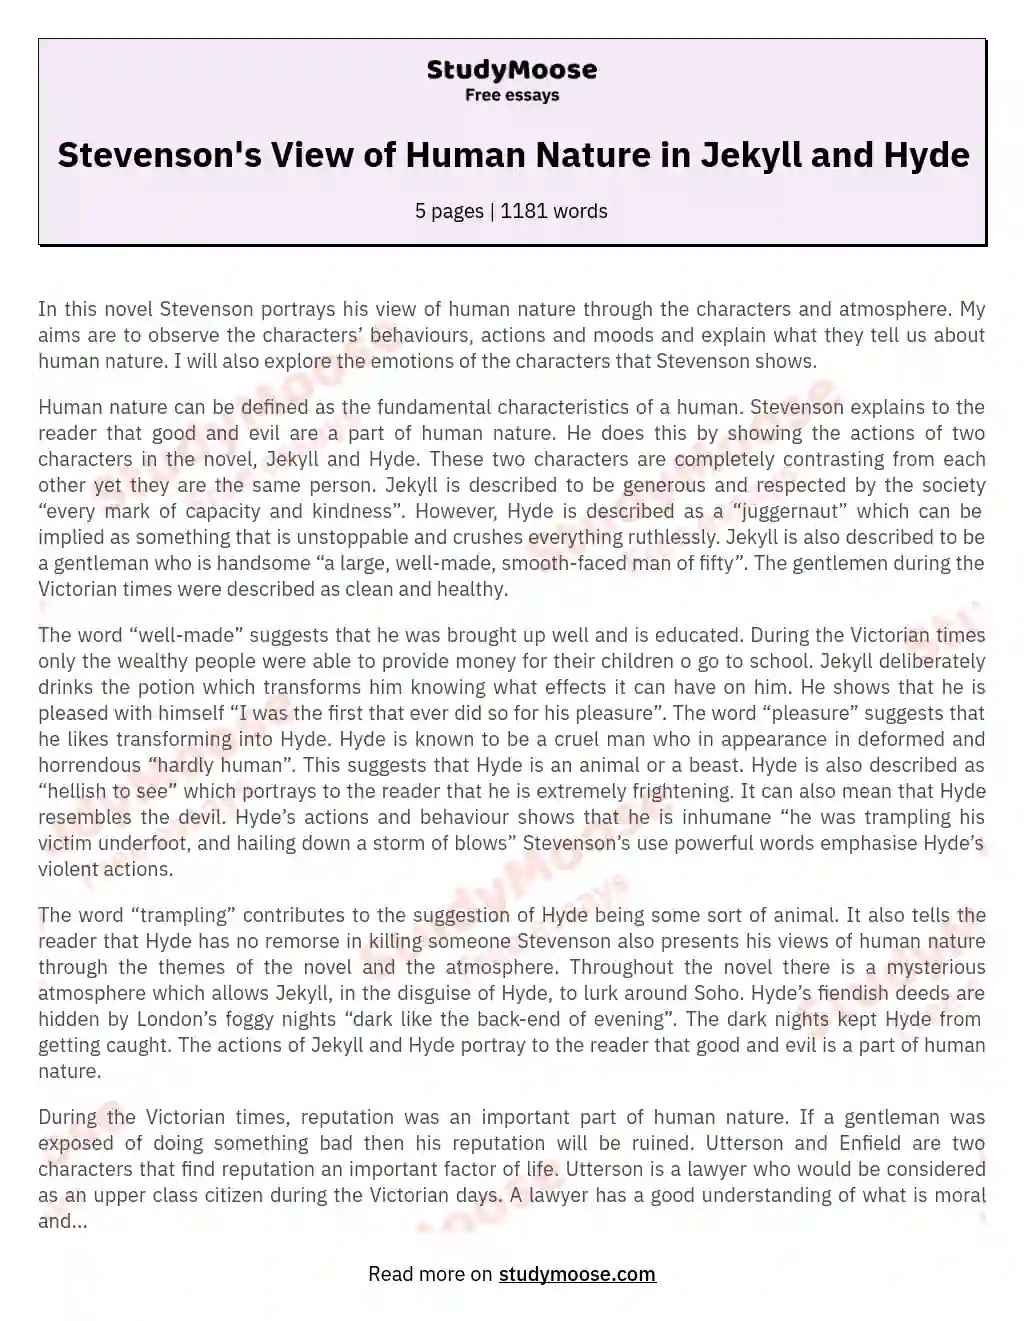 Stevenson's View of Human Nature in Jekyll and Hyde